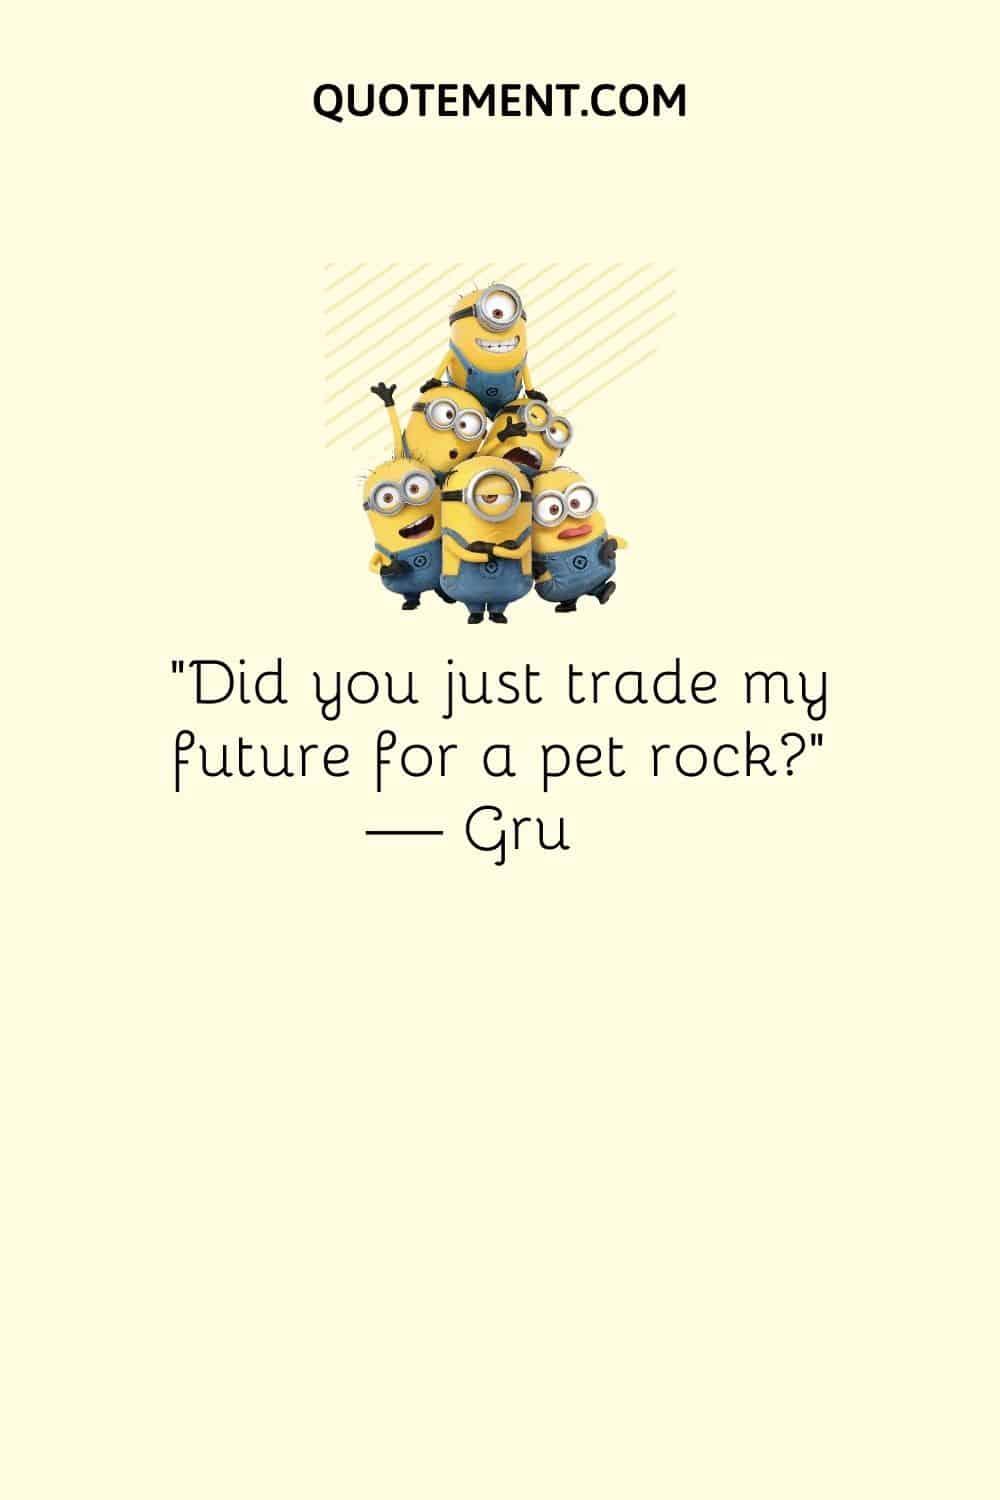 Did you just trade my future for a pet rock